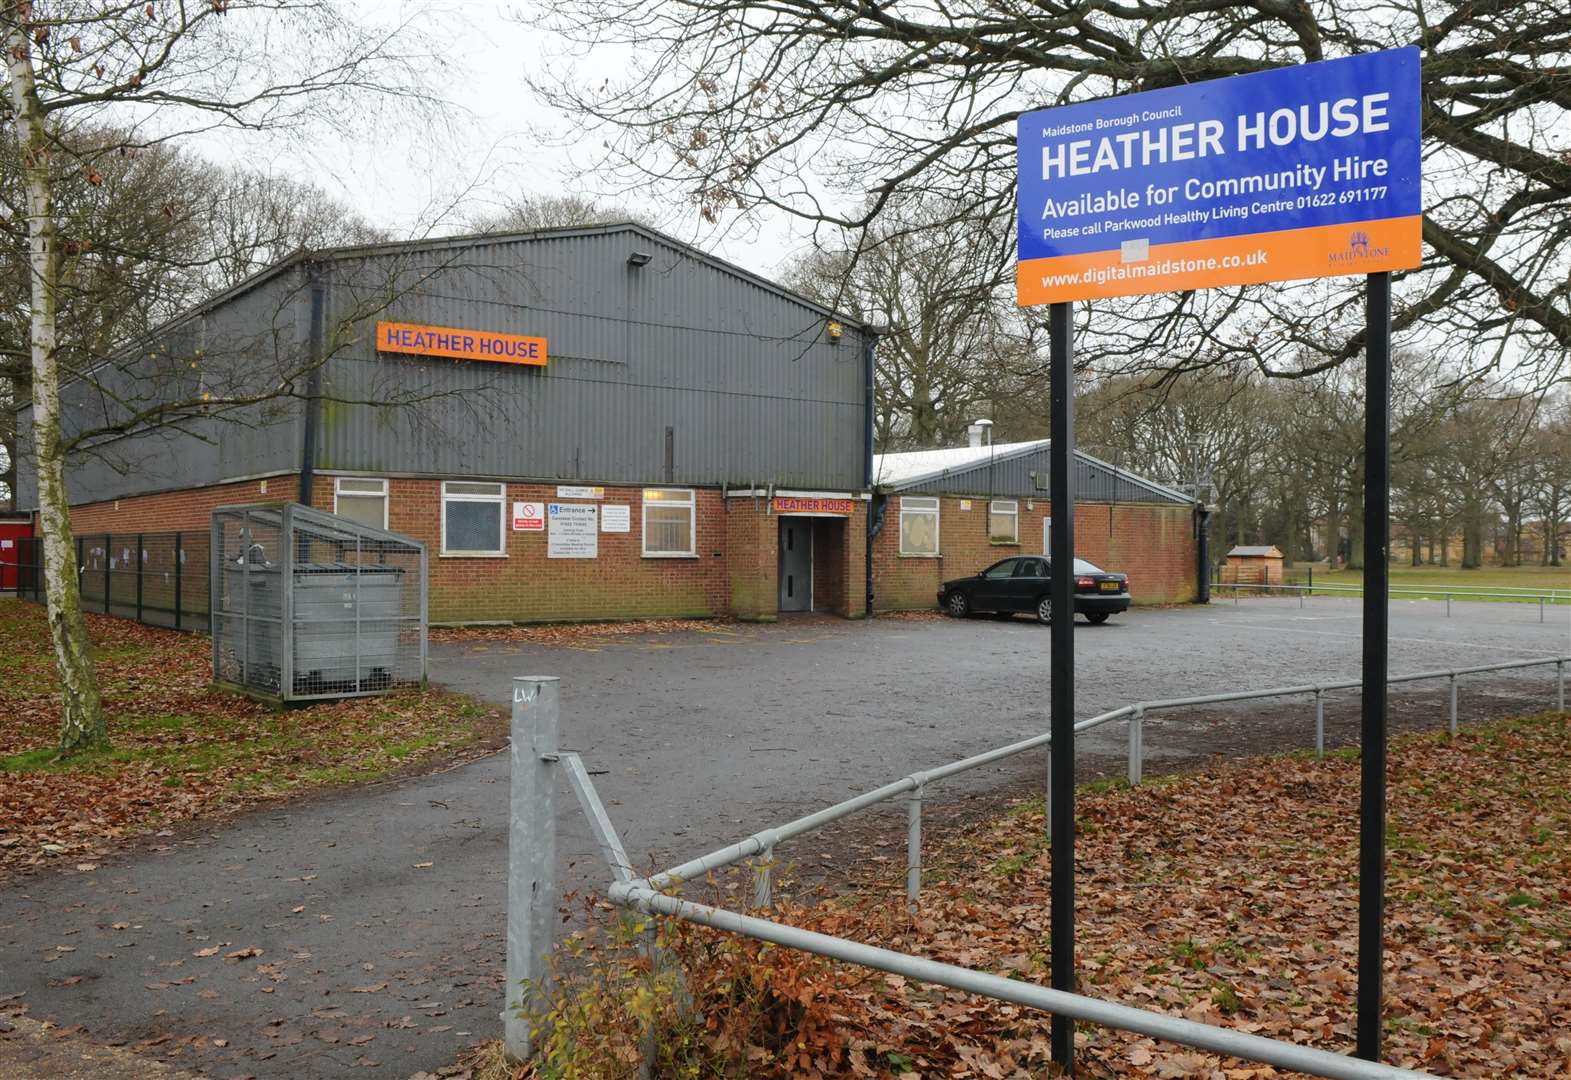 'Hall plans treat community as after thought'